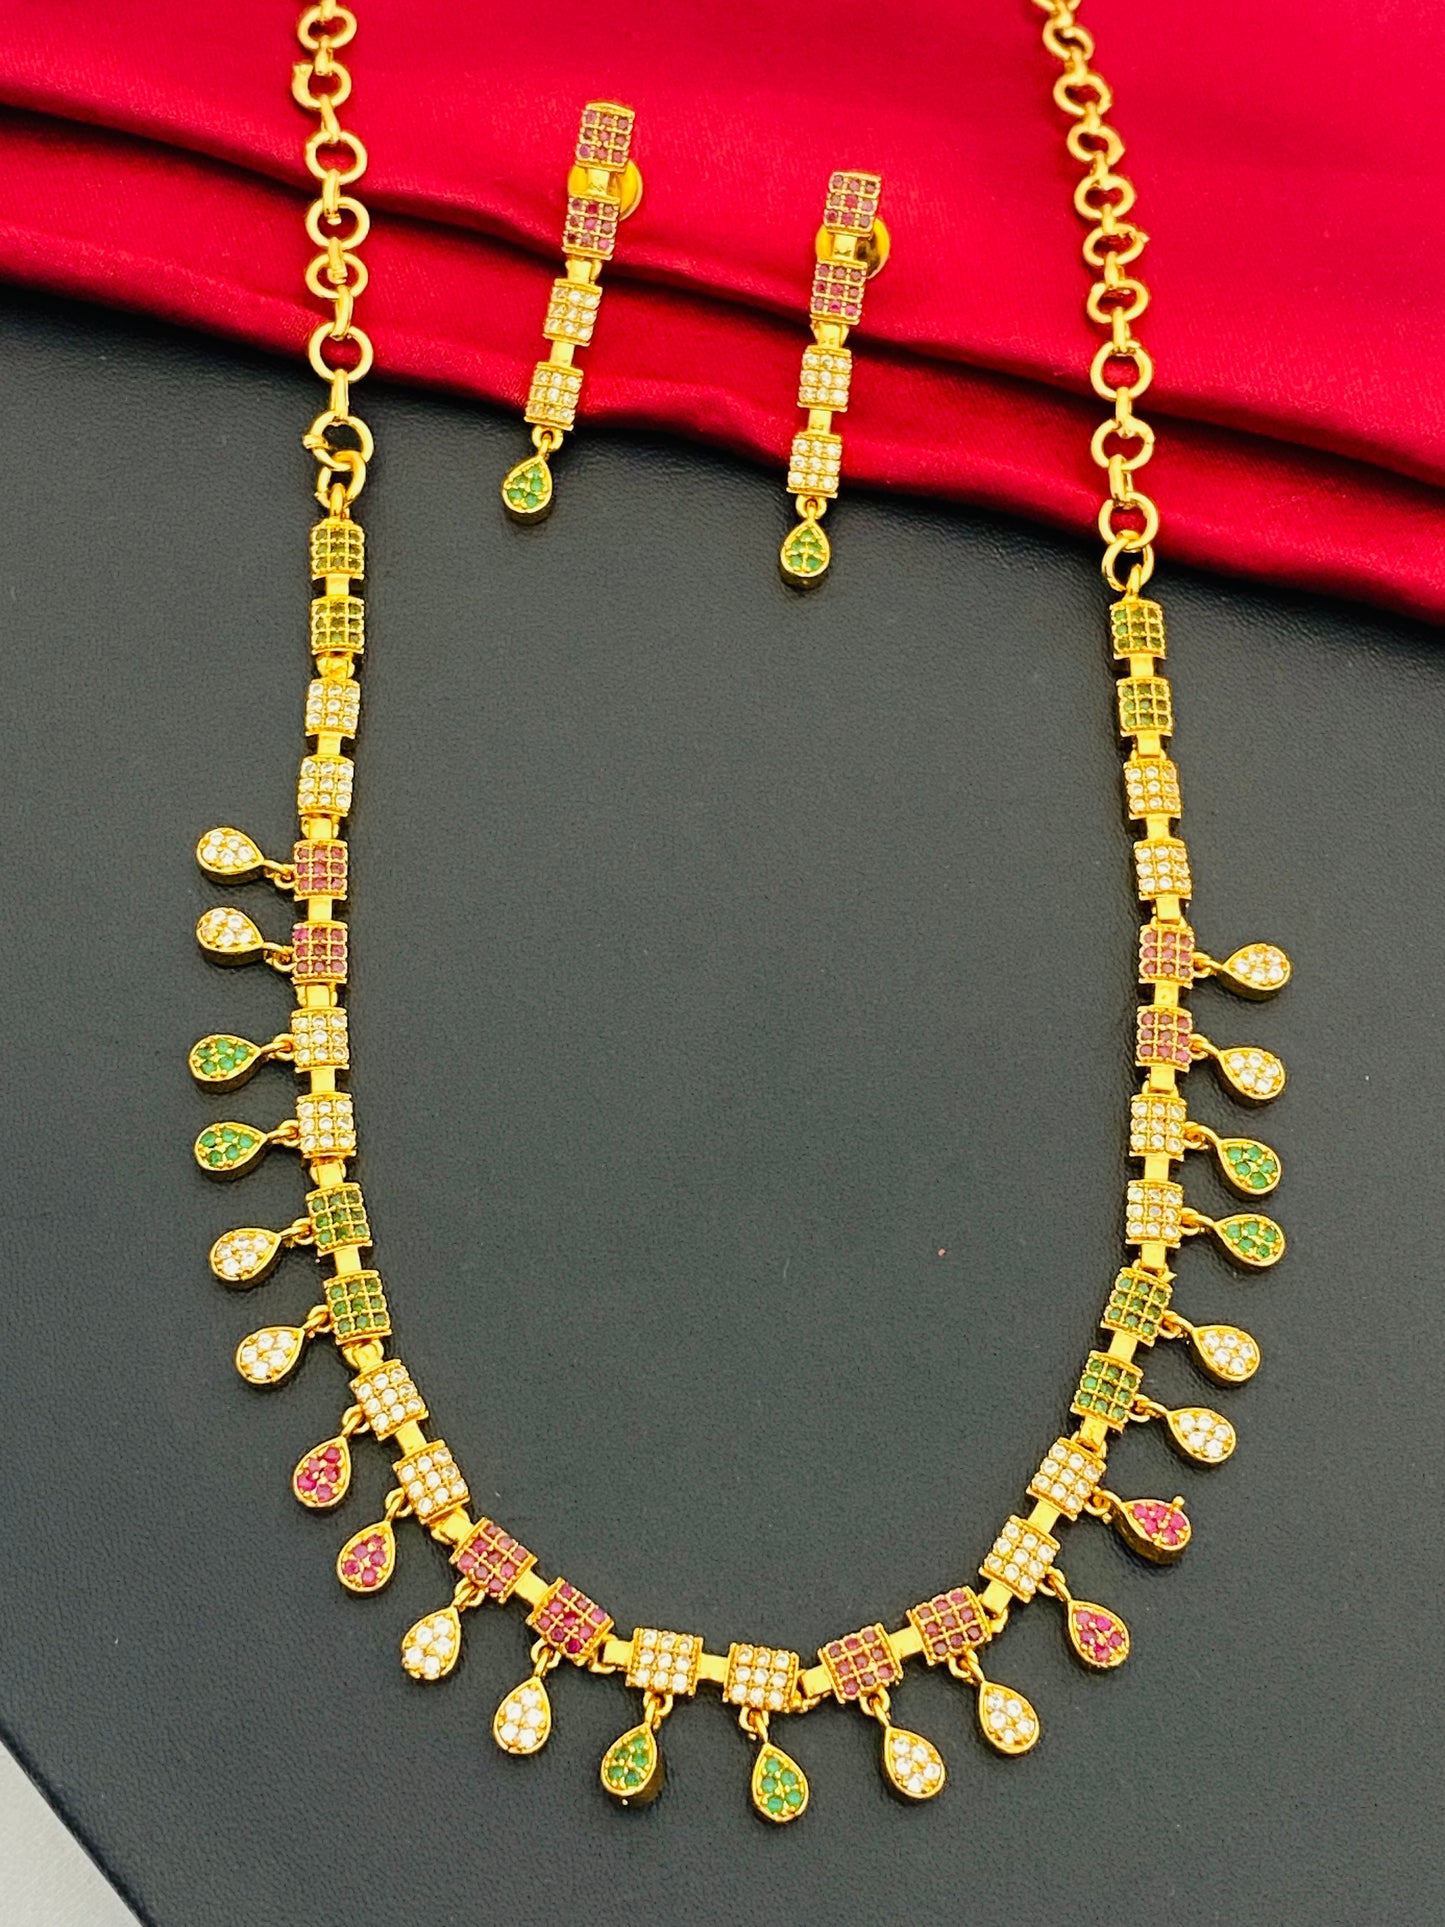 Premium Gold Plated Necklace With Earrings In Buckeye